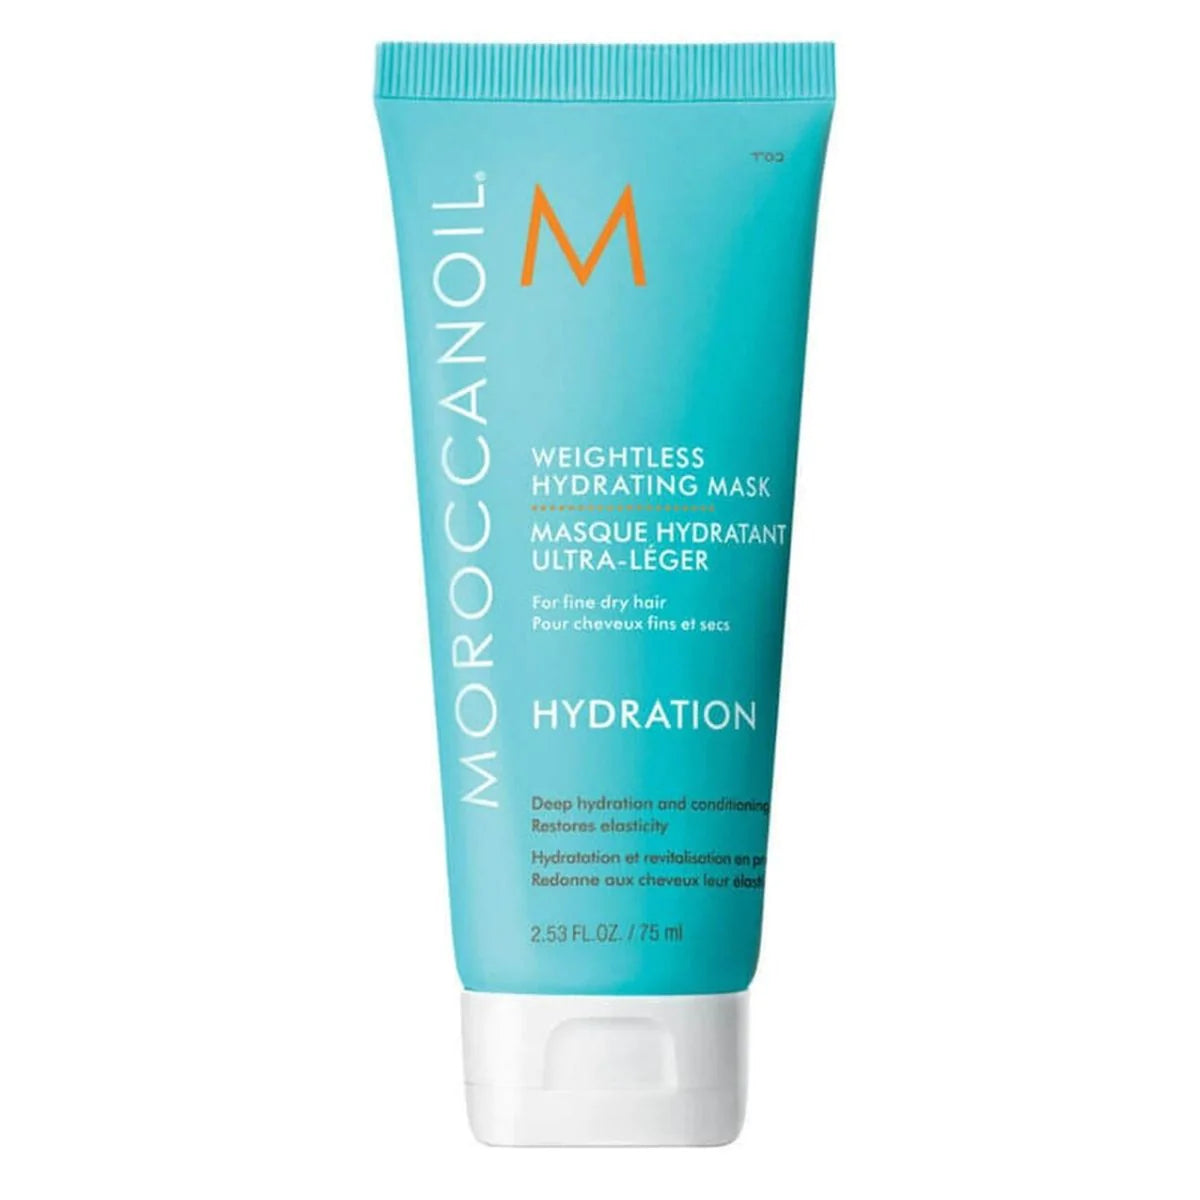 Moroccanoil Weightless Mask